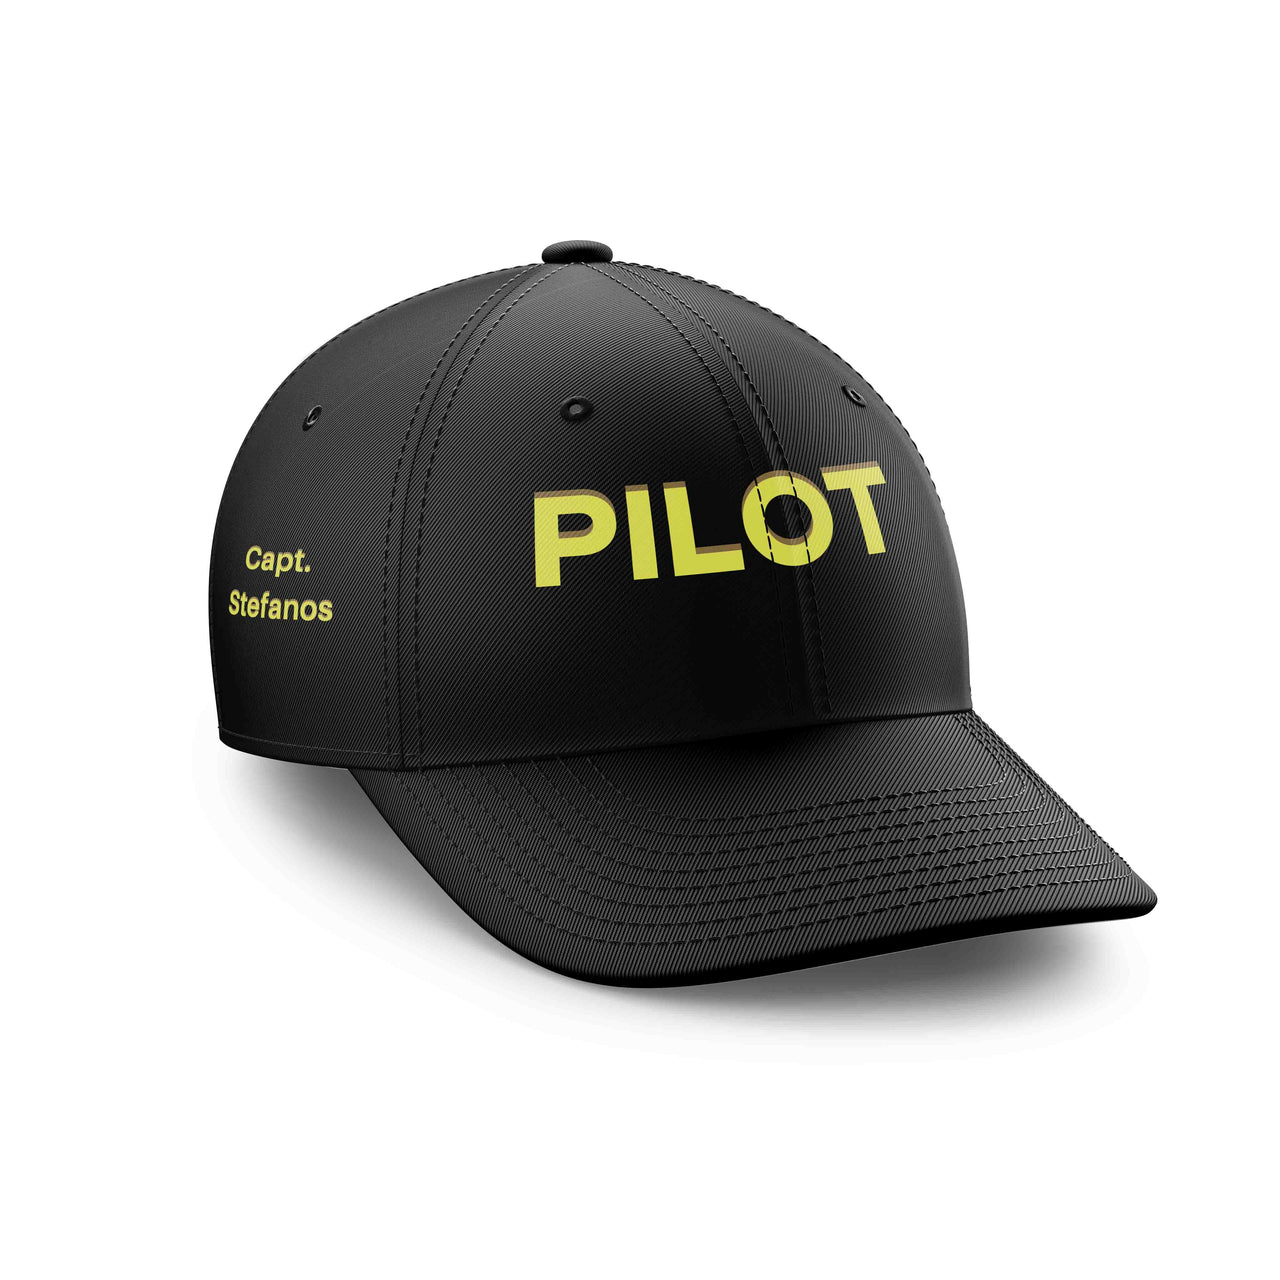 Customizable Name & PILOT Text Embroidered Hats